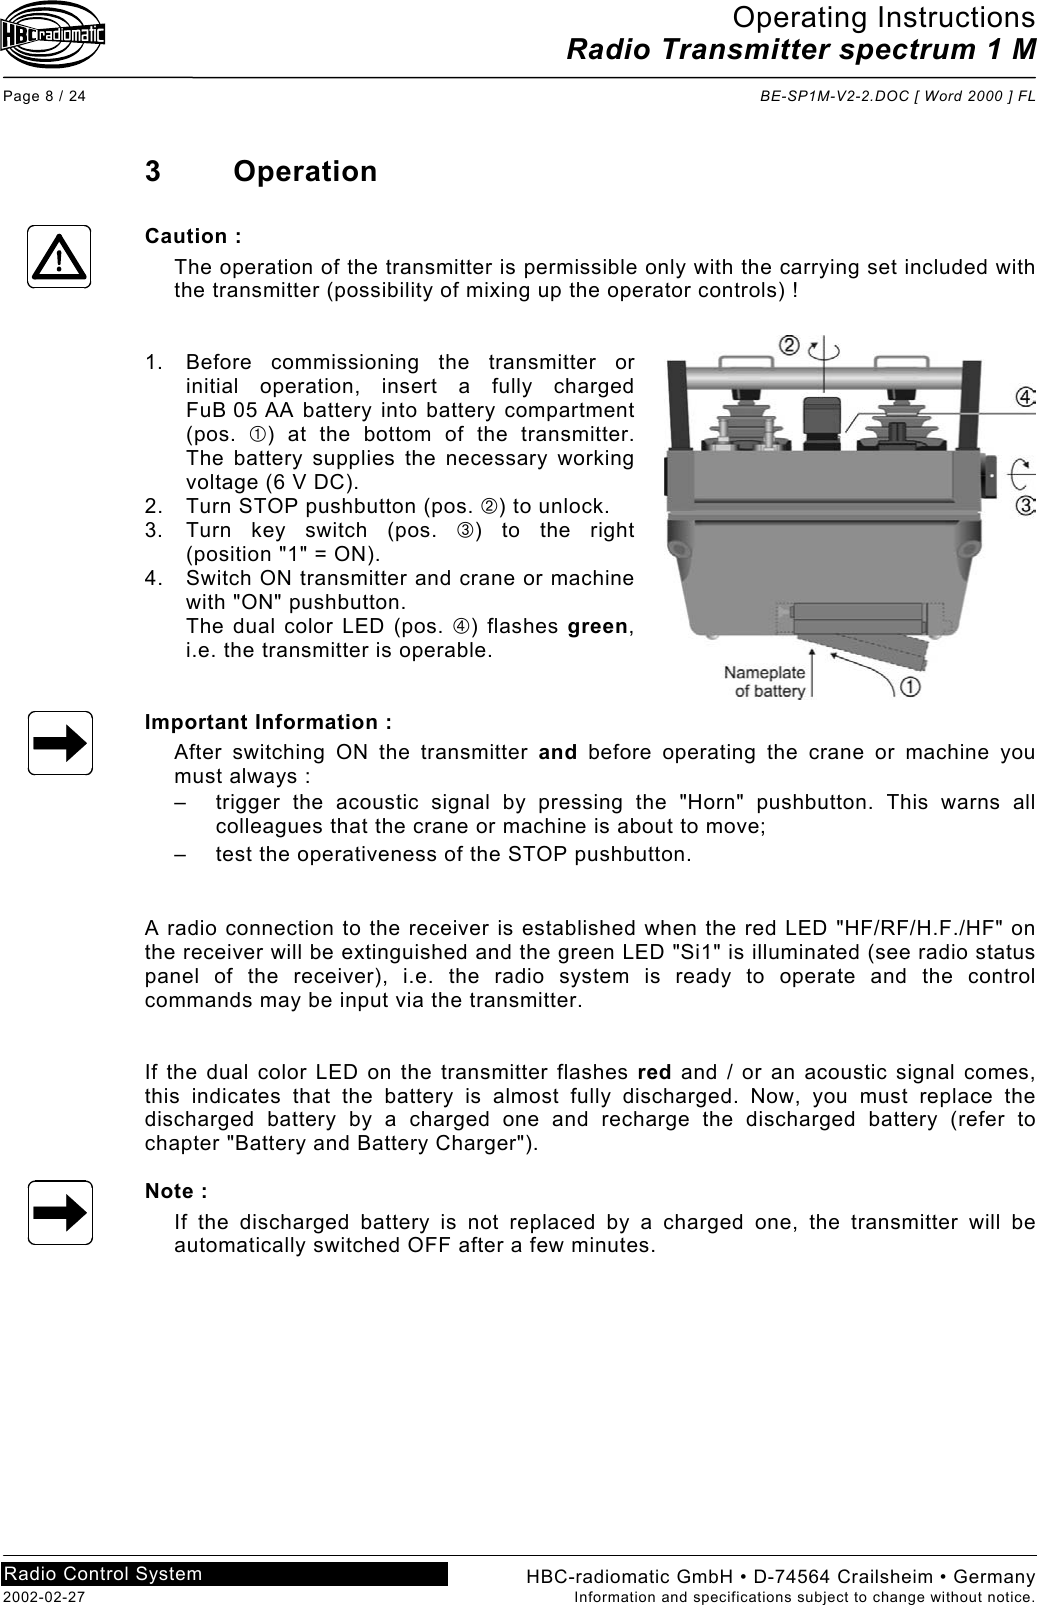 Operating Instructions Radio Transmitter spectrum 1 M  Page 8 / 24  BE-SP1M-V2-2.DOC [ Word 2000 ] FL HBC-radiomatic GmbH • D-74564 Crailsheim • Germany 2002-02-27  Information and specifications subject to change without notice. Radio Control System     3 Operation  Caution : The operation of the transmitter is permissible only with the carrying set included with the transmitter (possibility of mixing up the operator controls) !   1.  Before commissioning the transmitter or initial operation, insert a fully charged FuB 05 AA battery into battery compartment (pos.  ) at the bottom of the transmitter. The battery supplies the necessary working voltage (6 V DC). 2.  Turn STOP pushbutton (pos. ) to unlock. 3.  Turn key switch (pos. ) to the right (position &quot;1&quot; = ON). 4.  Switch ON transmitter and crane or machine with &quot;ON&quot; pushbutton. The dual color LED (pos. ) flashes green, i.e. the transmitter is operable.   Important Information : After switching ON the transmitter and before operating the crane or machine you must always : –  trigger the acoustic signal by pressing the &quot;Horn&quot; pushbutton. This warns all colleagues that the crane or machine is about to move; –  test the operativeness of the STOP pushbutton.   A radio connection to the receiver is established when the red LED &quot;HF/RF/H.F./HF&quot; on the receiver will be extinguished and the green LED &quot;Si1&quot; is illuminated (see radio status panel of the receiver), i.e. the radio system is ready to operate and the control commands may be input via the transmitter.   If the dual color LED on the transmitter flashes red and / or an acoustic signal comes, this indicates that the battery is almost fully discharged. Now, you must replace the discharged battery by a charged one and recharge the discharged battery (refer to chapter &quot;Battery and Battery Charger&quot;).  Note : If the discharged battery is not replaced by a charged one, the transmitter will be automatically switched OFF after a few minutes.   